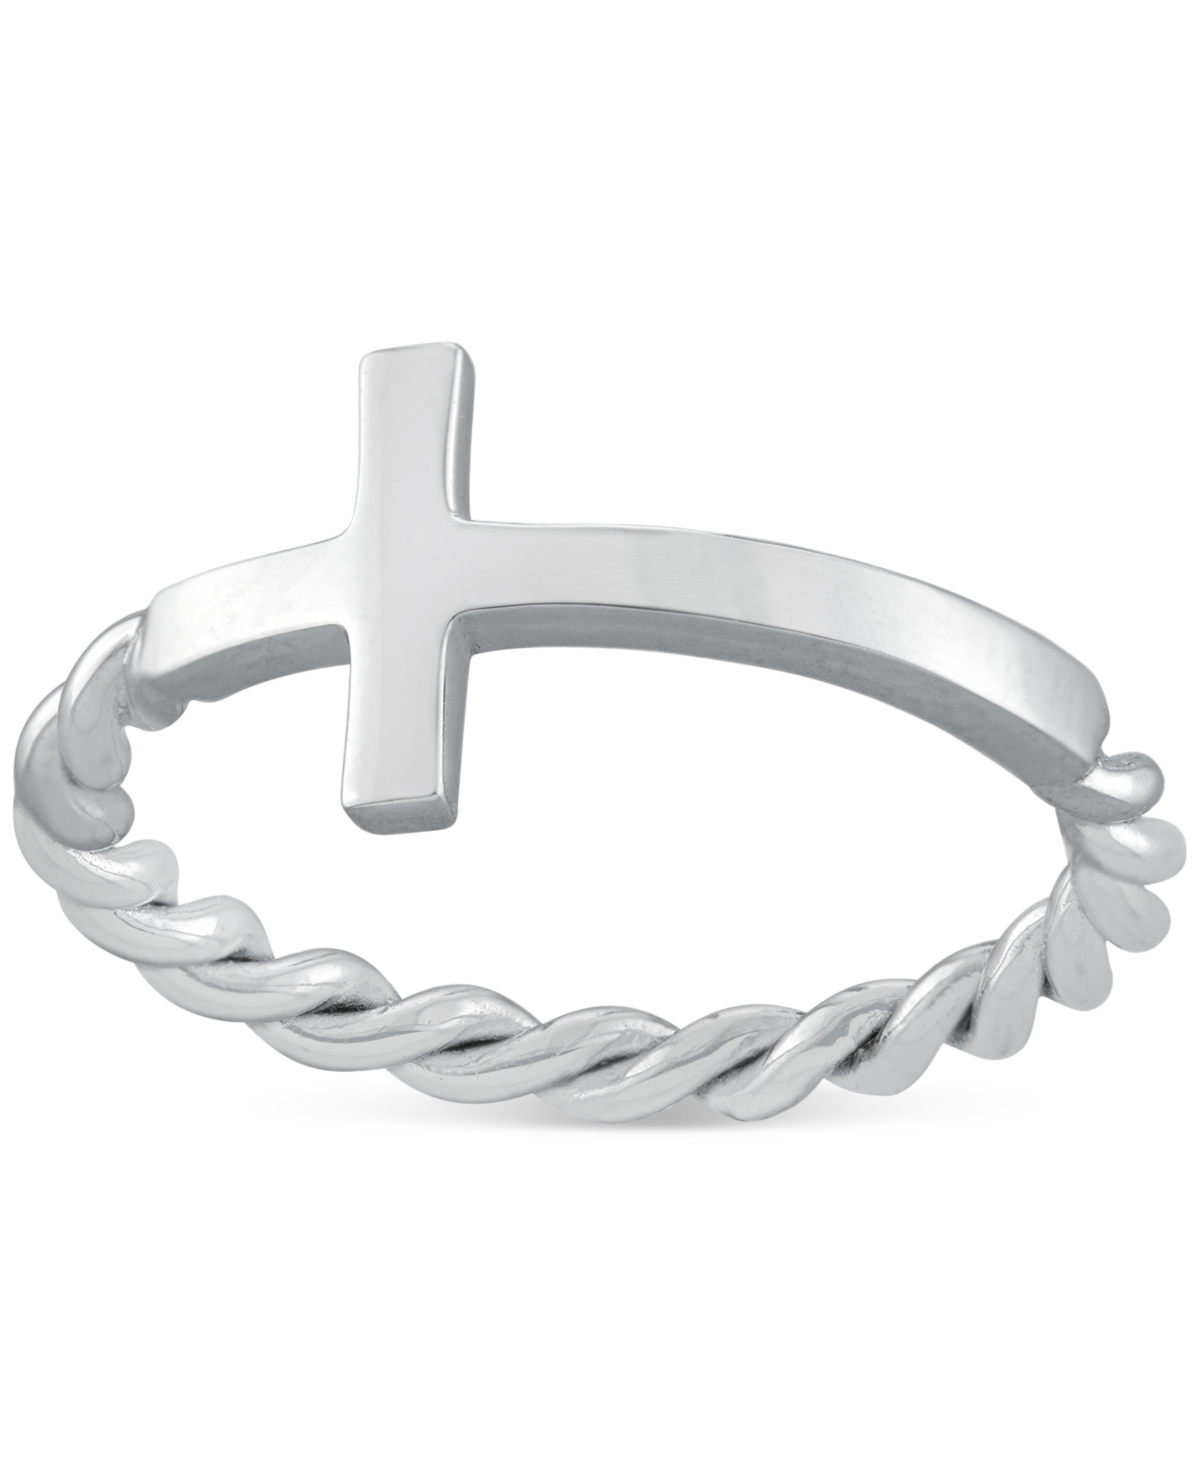 Giani Bernini East-West Cross Ring in Sterling Silver, Created for Macy's